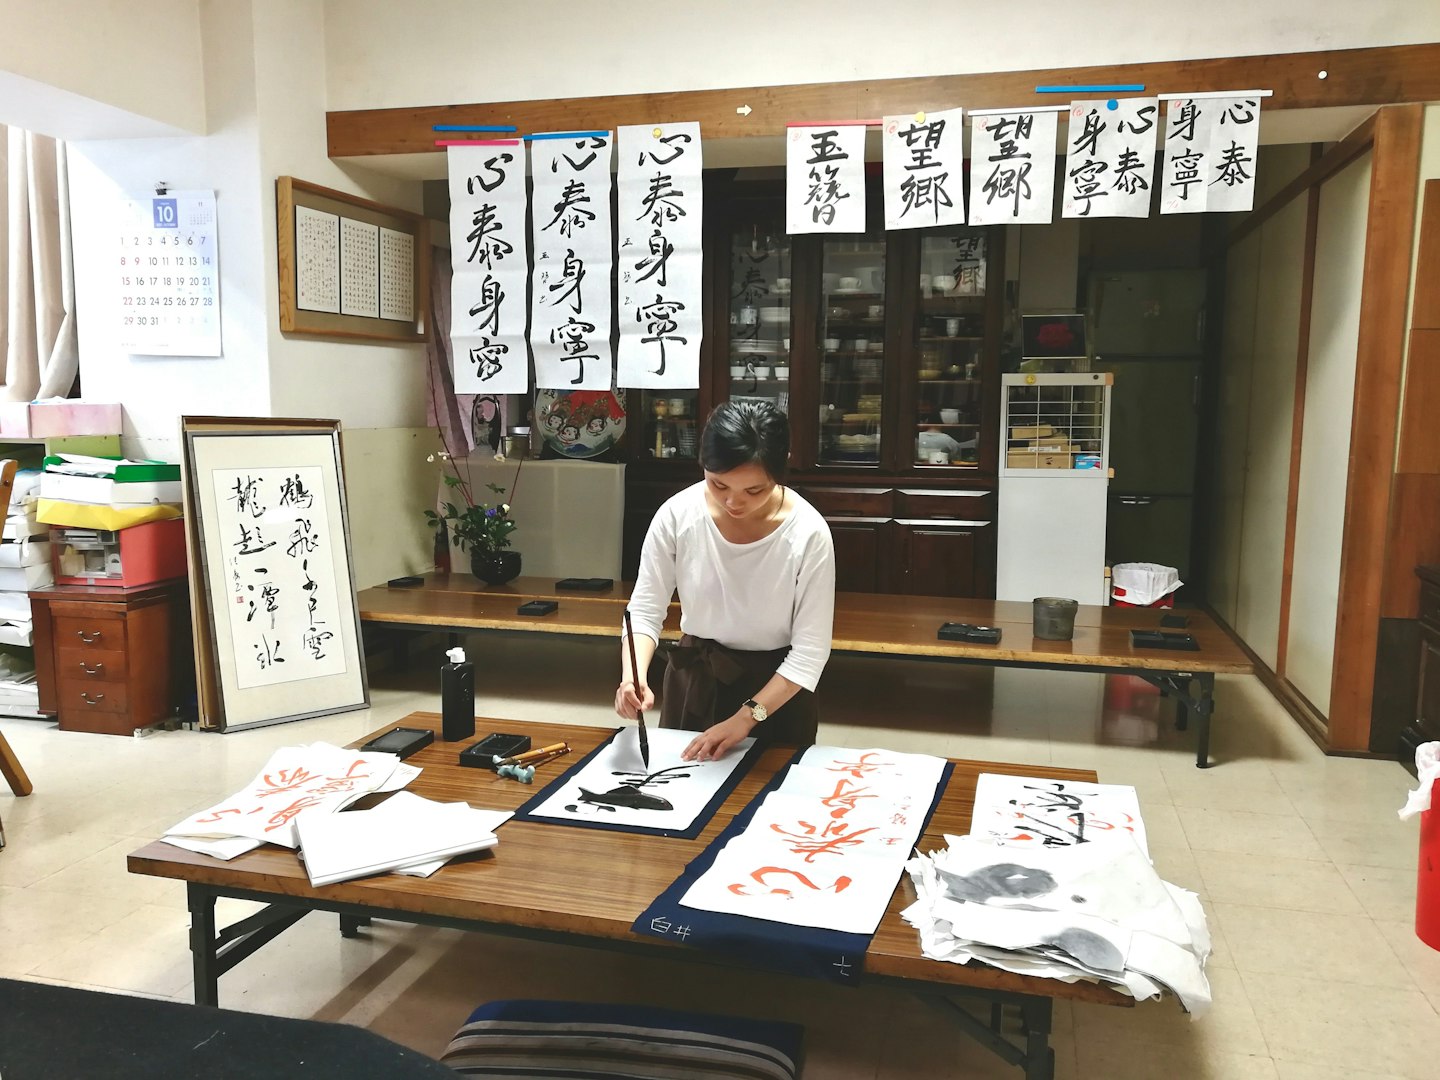 You can seek out creativity in a calligraphy studio in Japan or your own backyard. Courtesy of Kate Tram Nguyen.